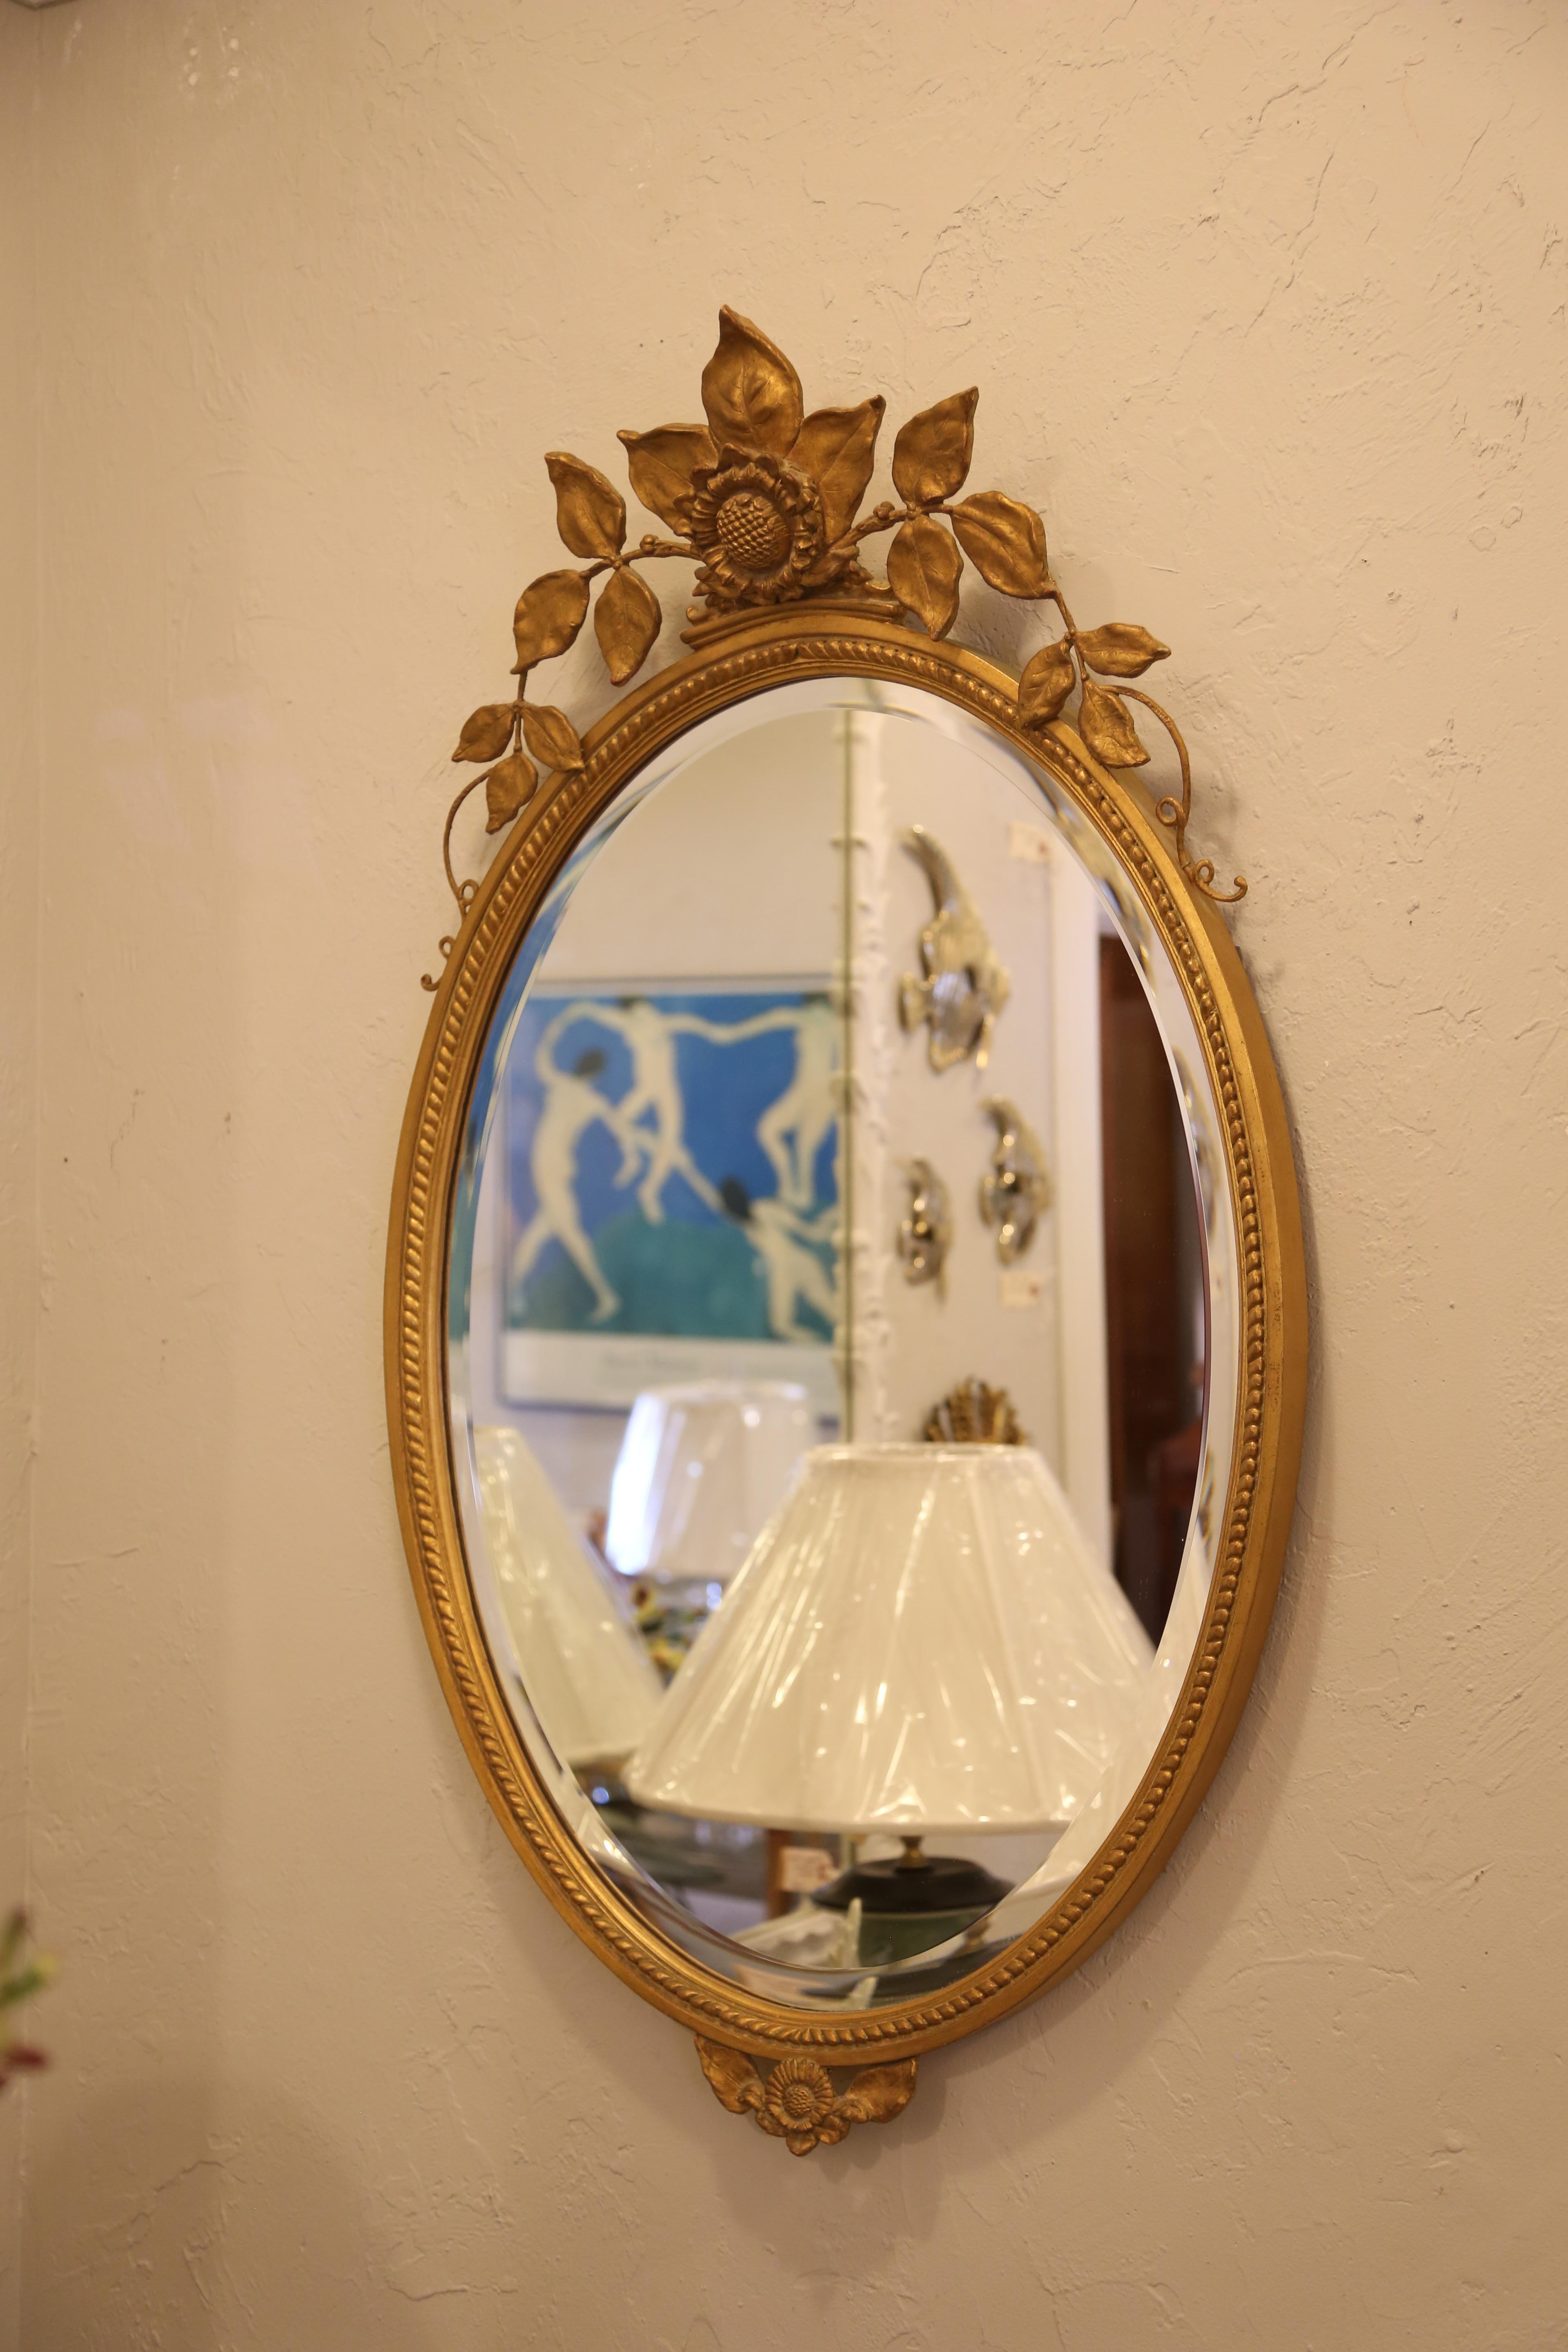 Oval gilded mirror adorned with petals and topped with a sunflower. Created by Carol Canner for Carvers Guild.